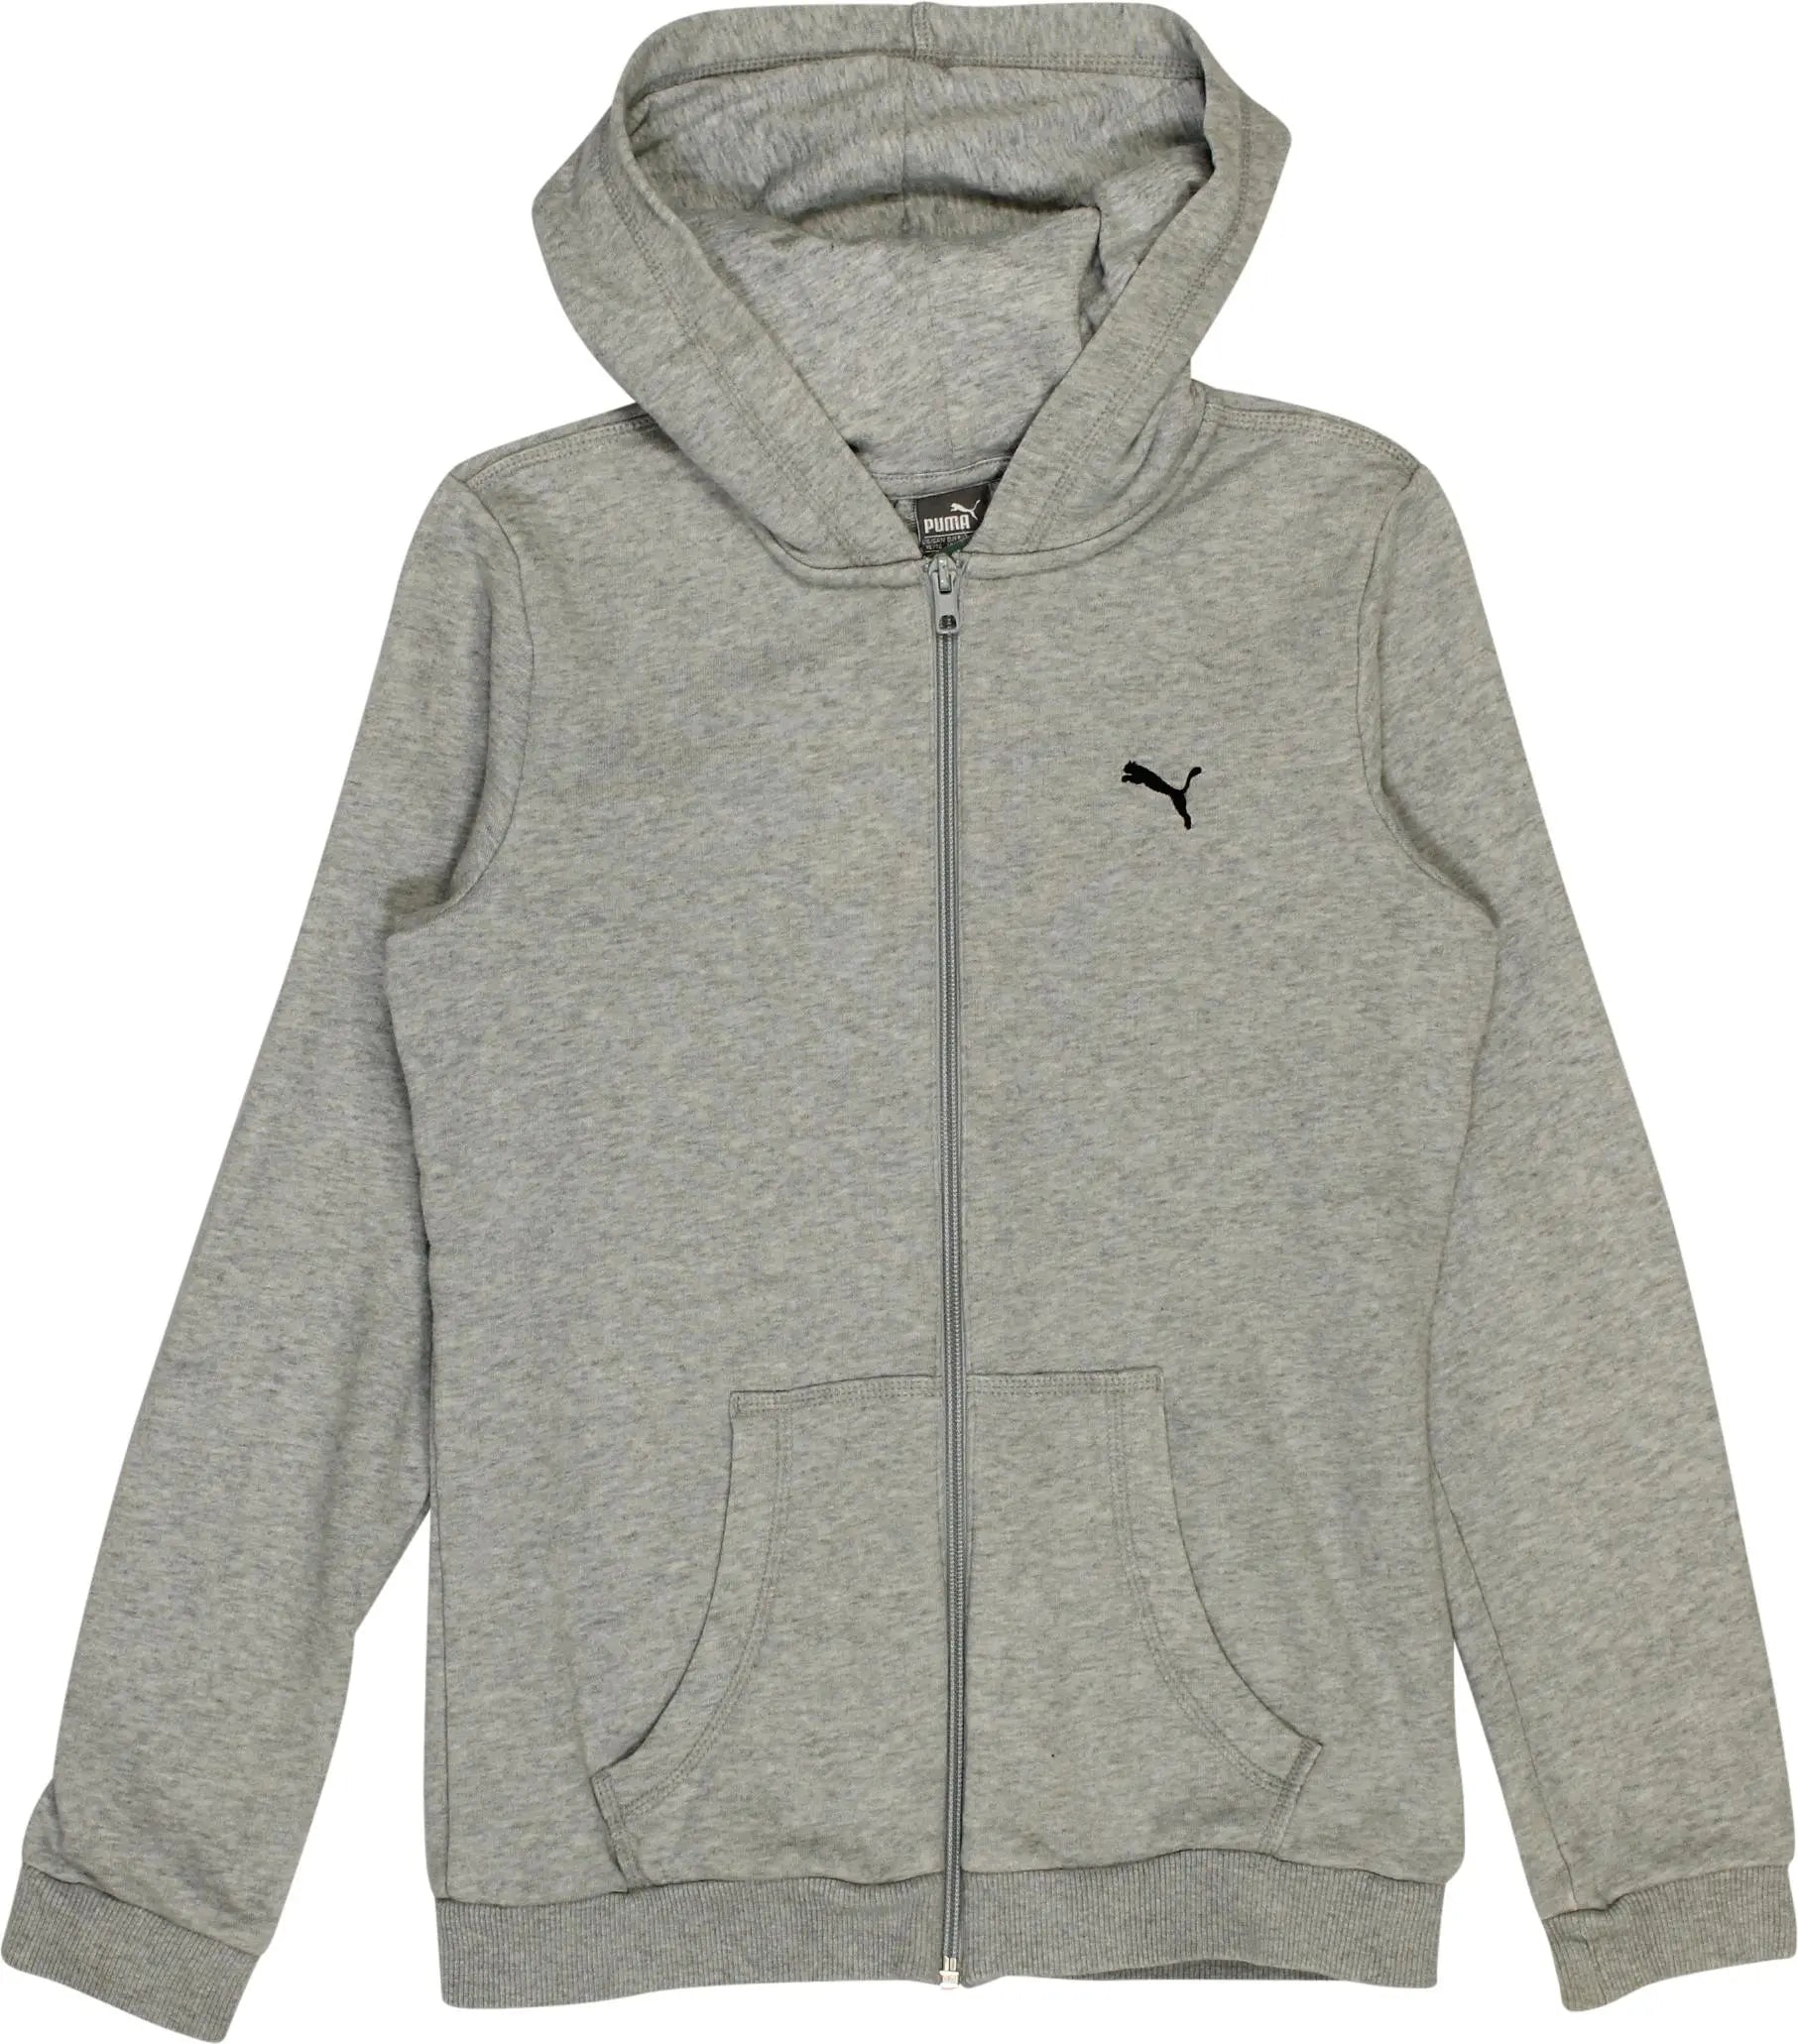 Puma - Zip Up Hoodie by Puma- ThriftTale.com - Vintage and second handclothing